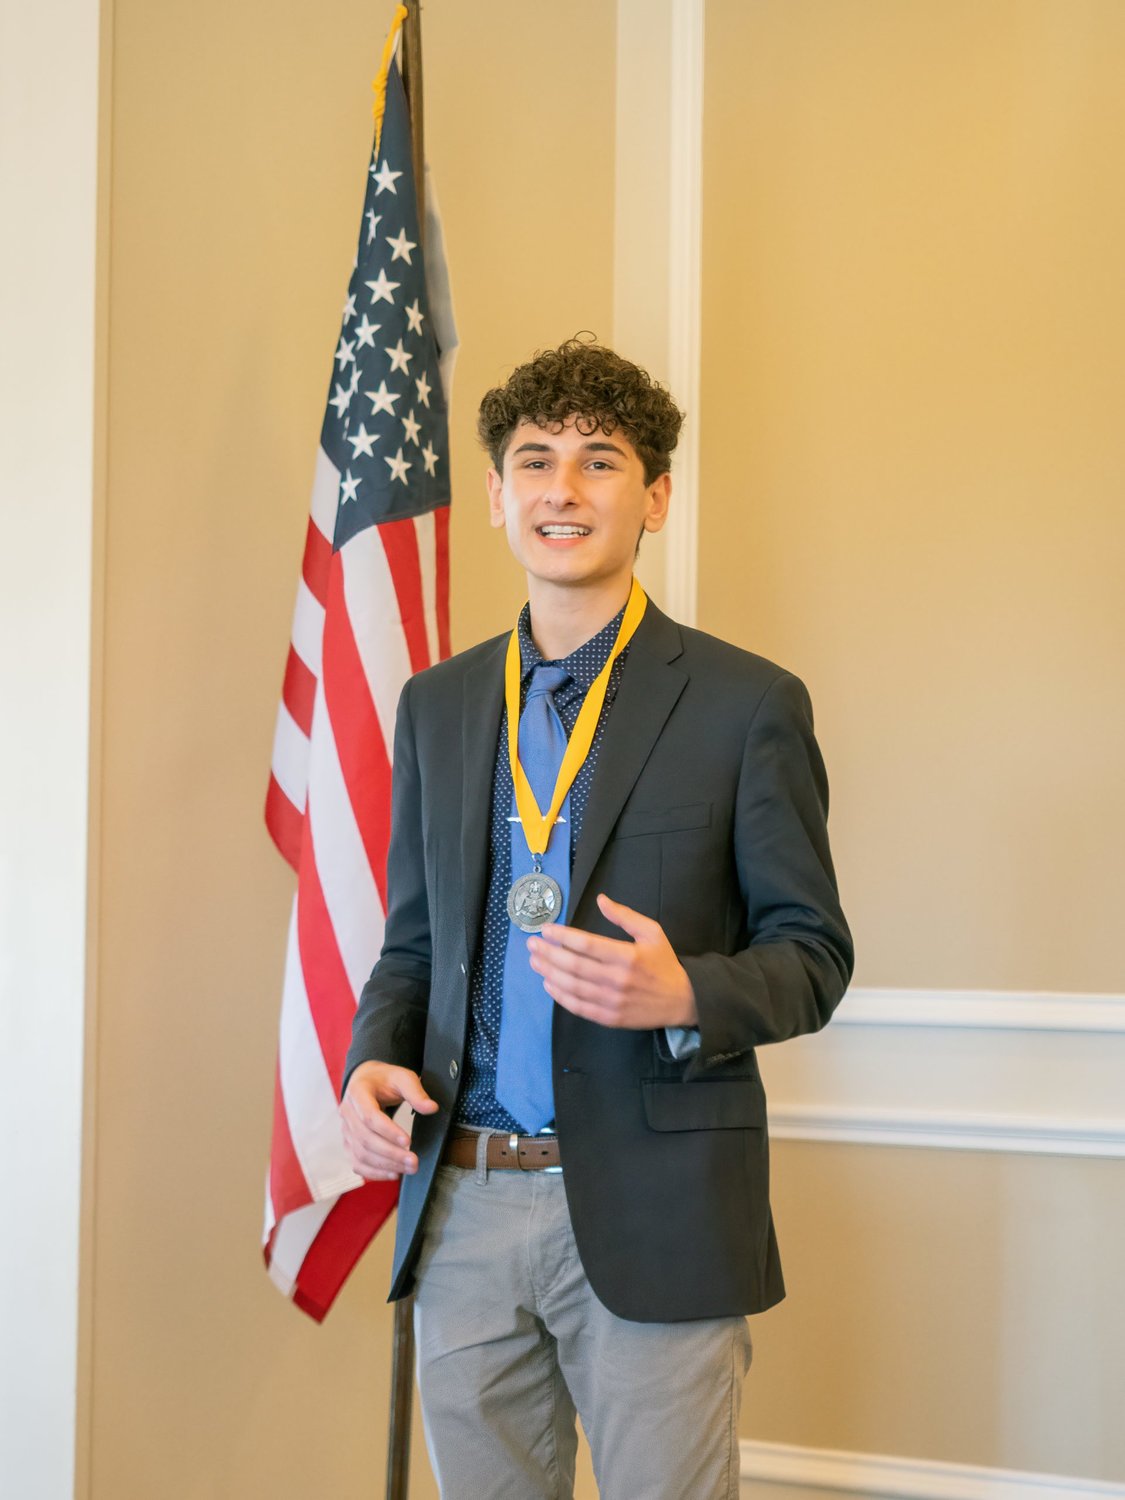 Gio Cacciato, Northwood senior, shares his winning speech about the lasting legacy of Roger Sherman to the crowd last Saturday at Governors Club as part of the Sons of American Revolution Rumbaugh Oration Contest.